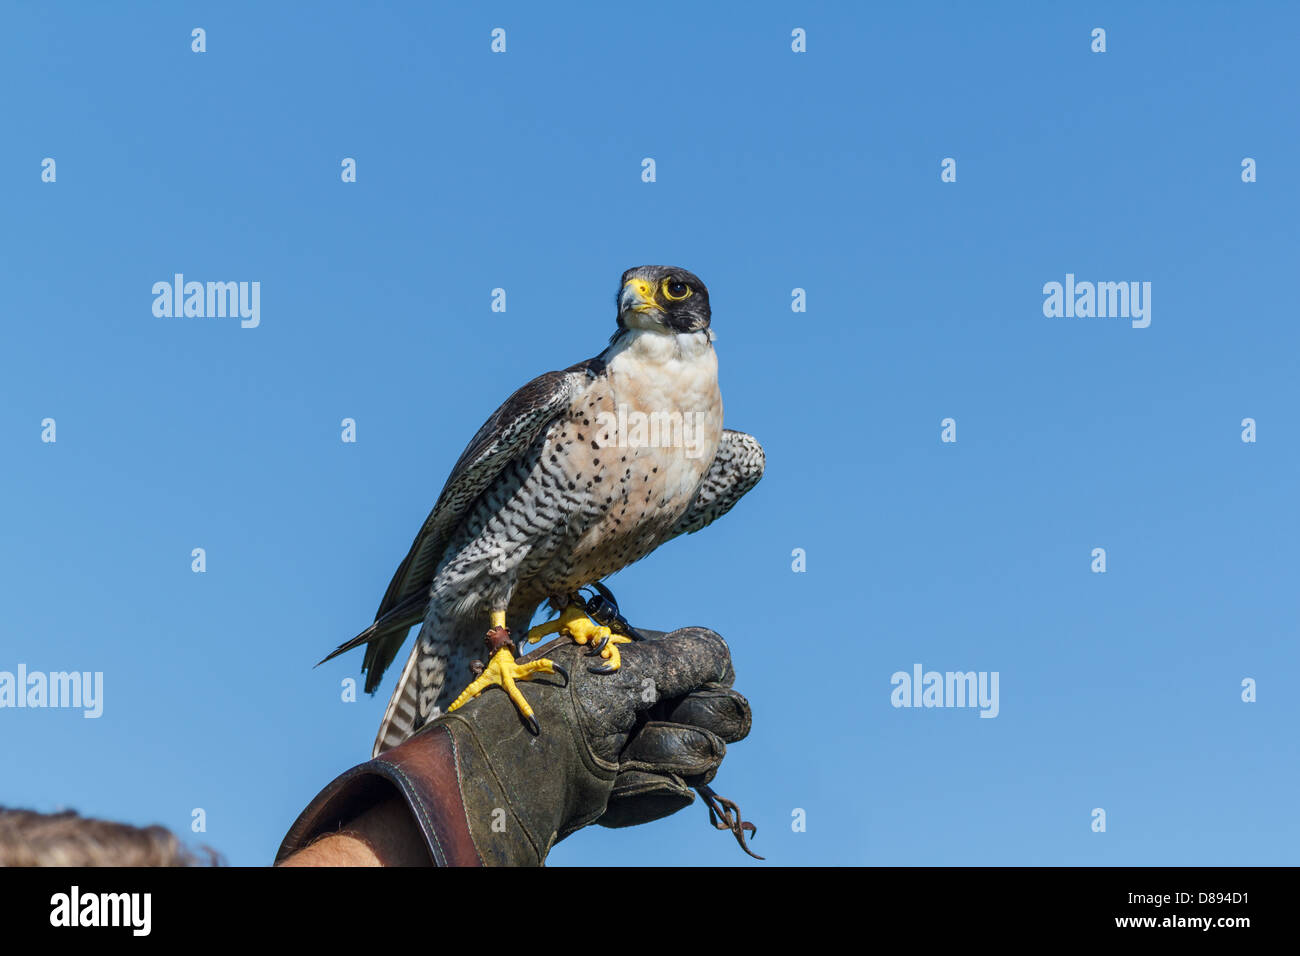 A peregrine Falcon resting on the falconeer's glove. Stock Photo